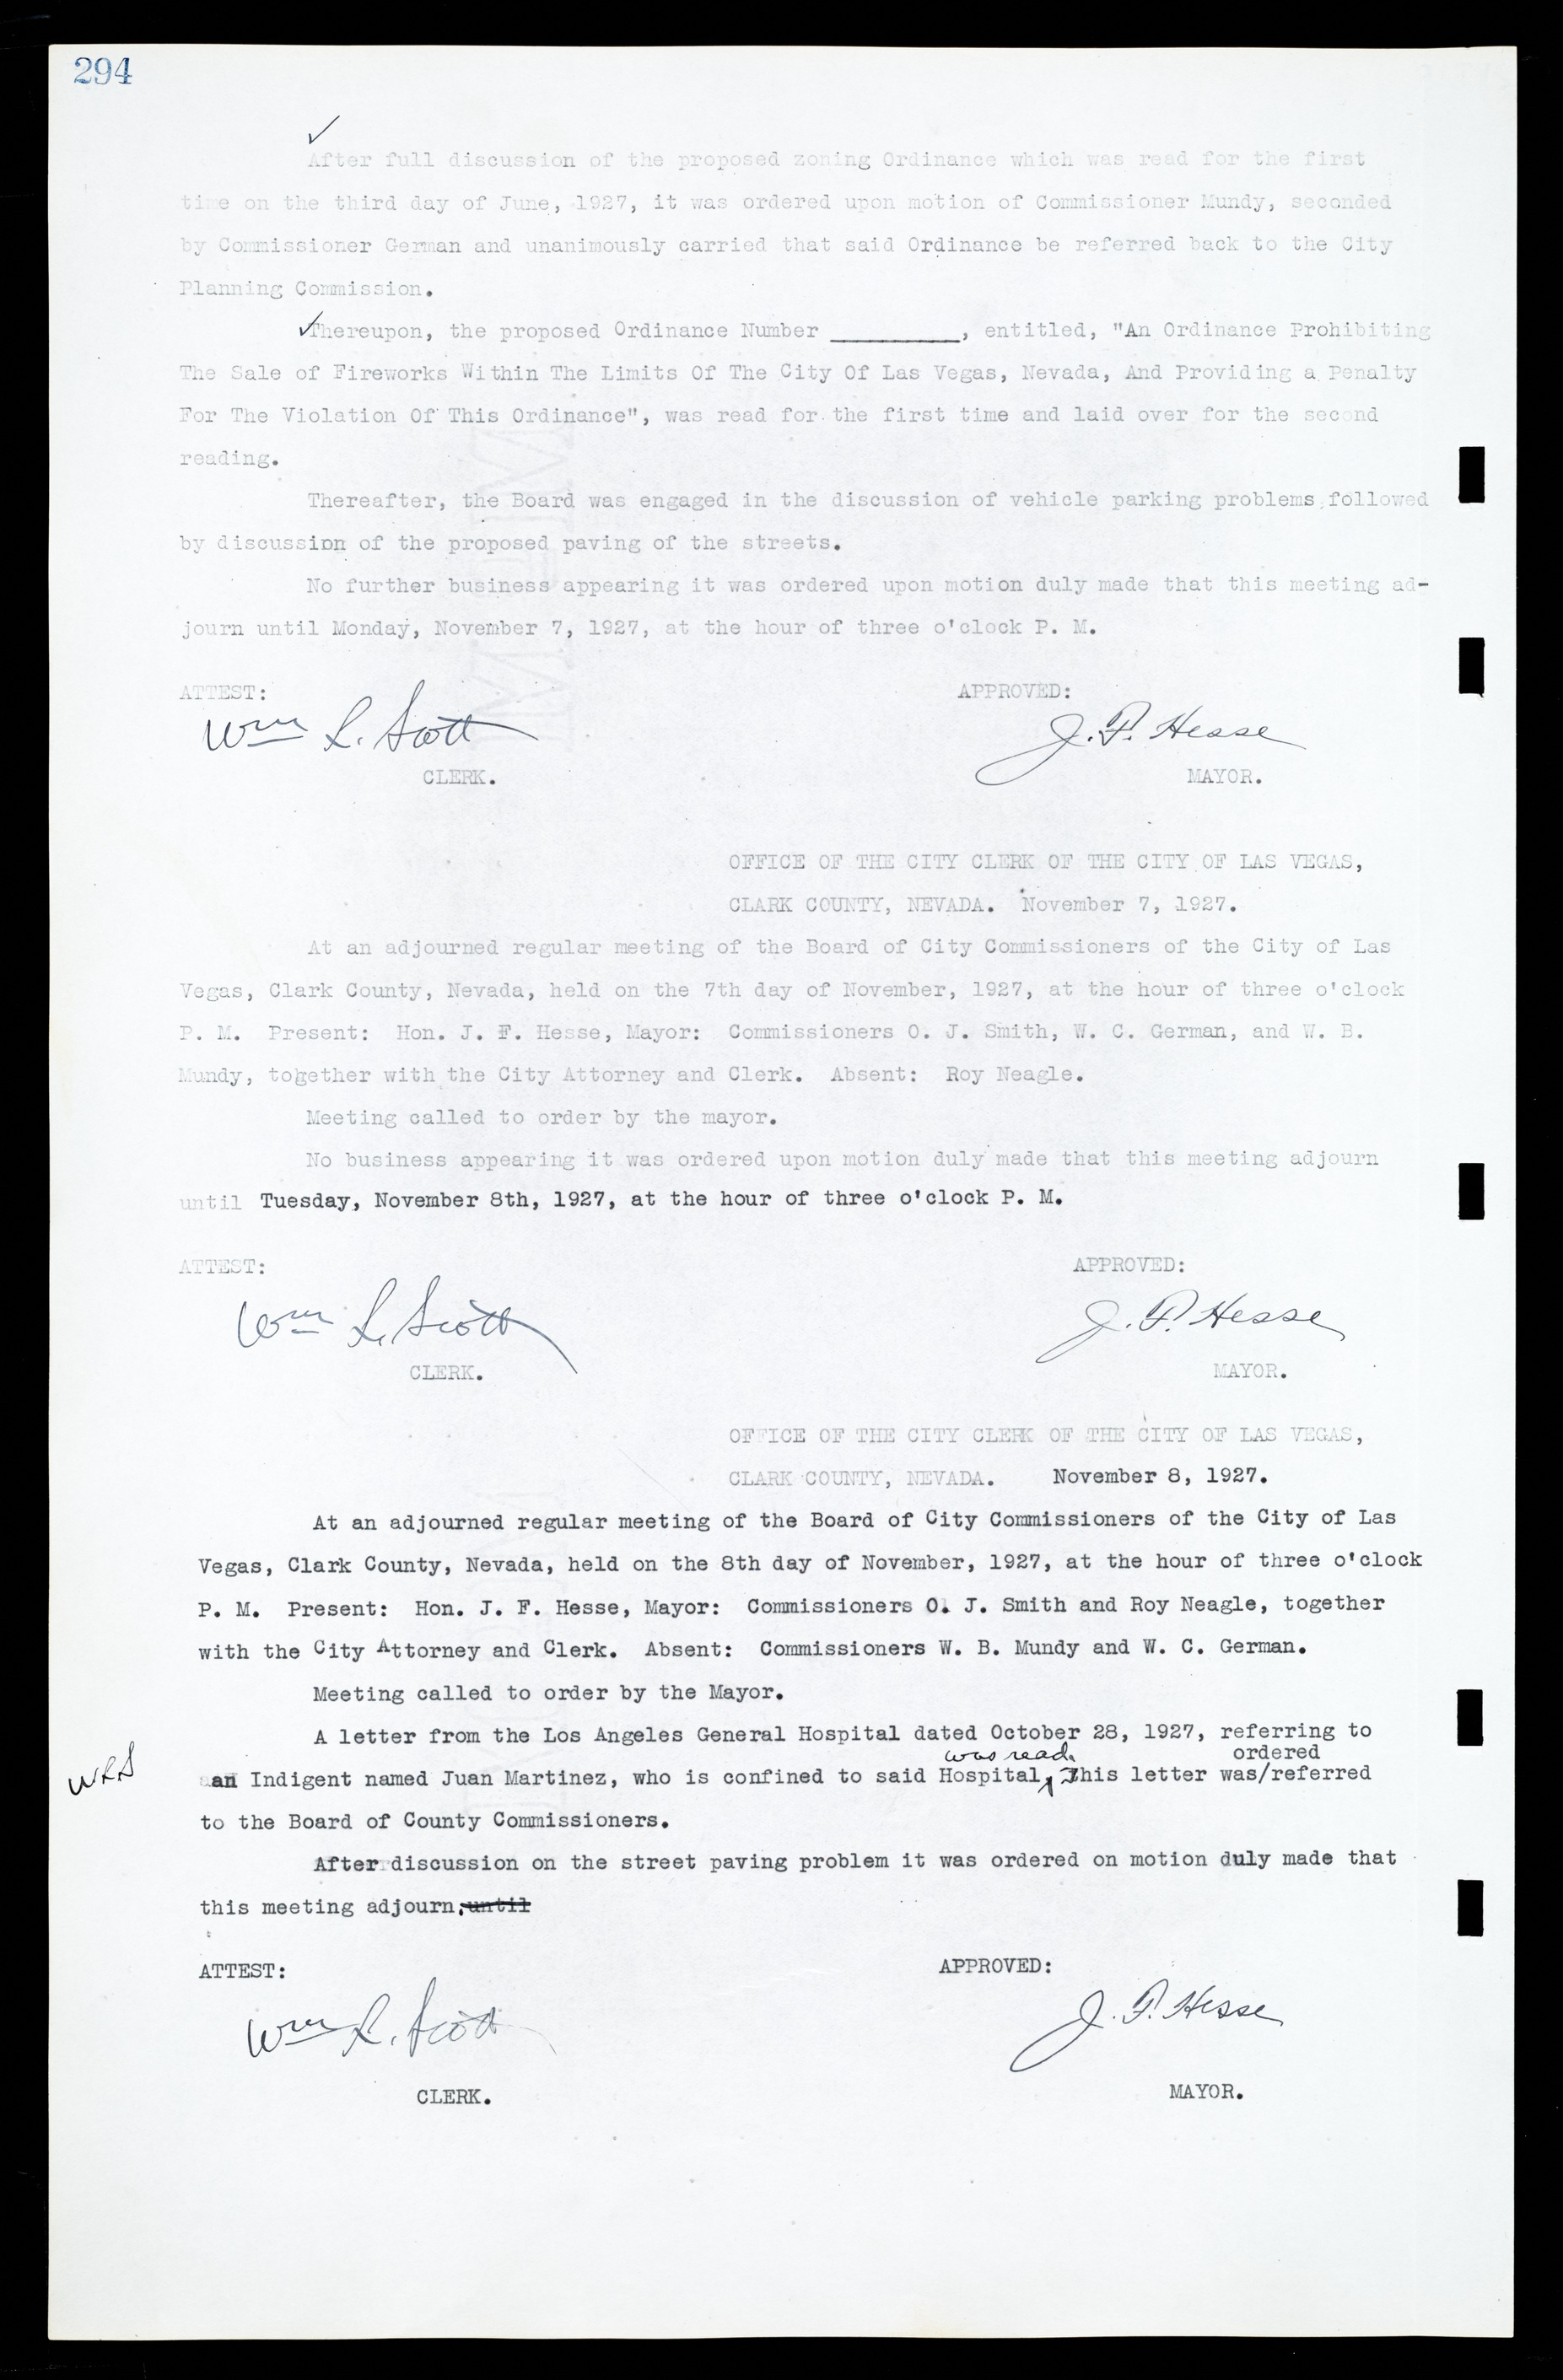 Las Vegas City Commission Minutes, March 1, 1922 to May 10, 1929, lvc000002-303